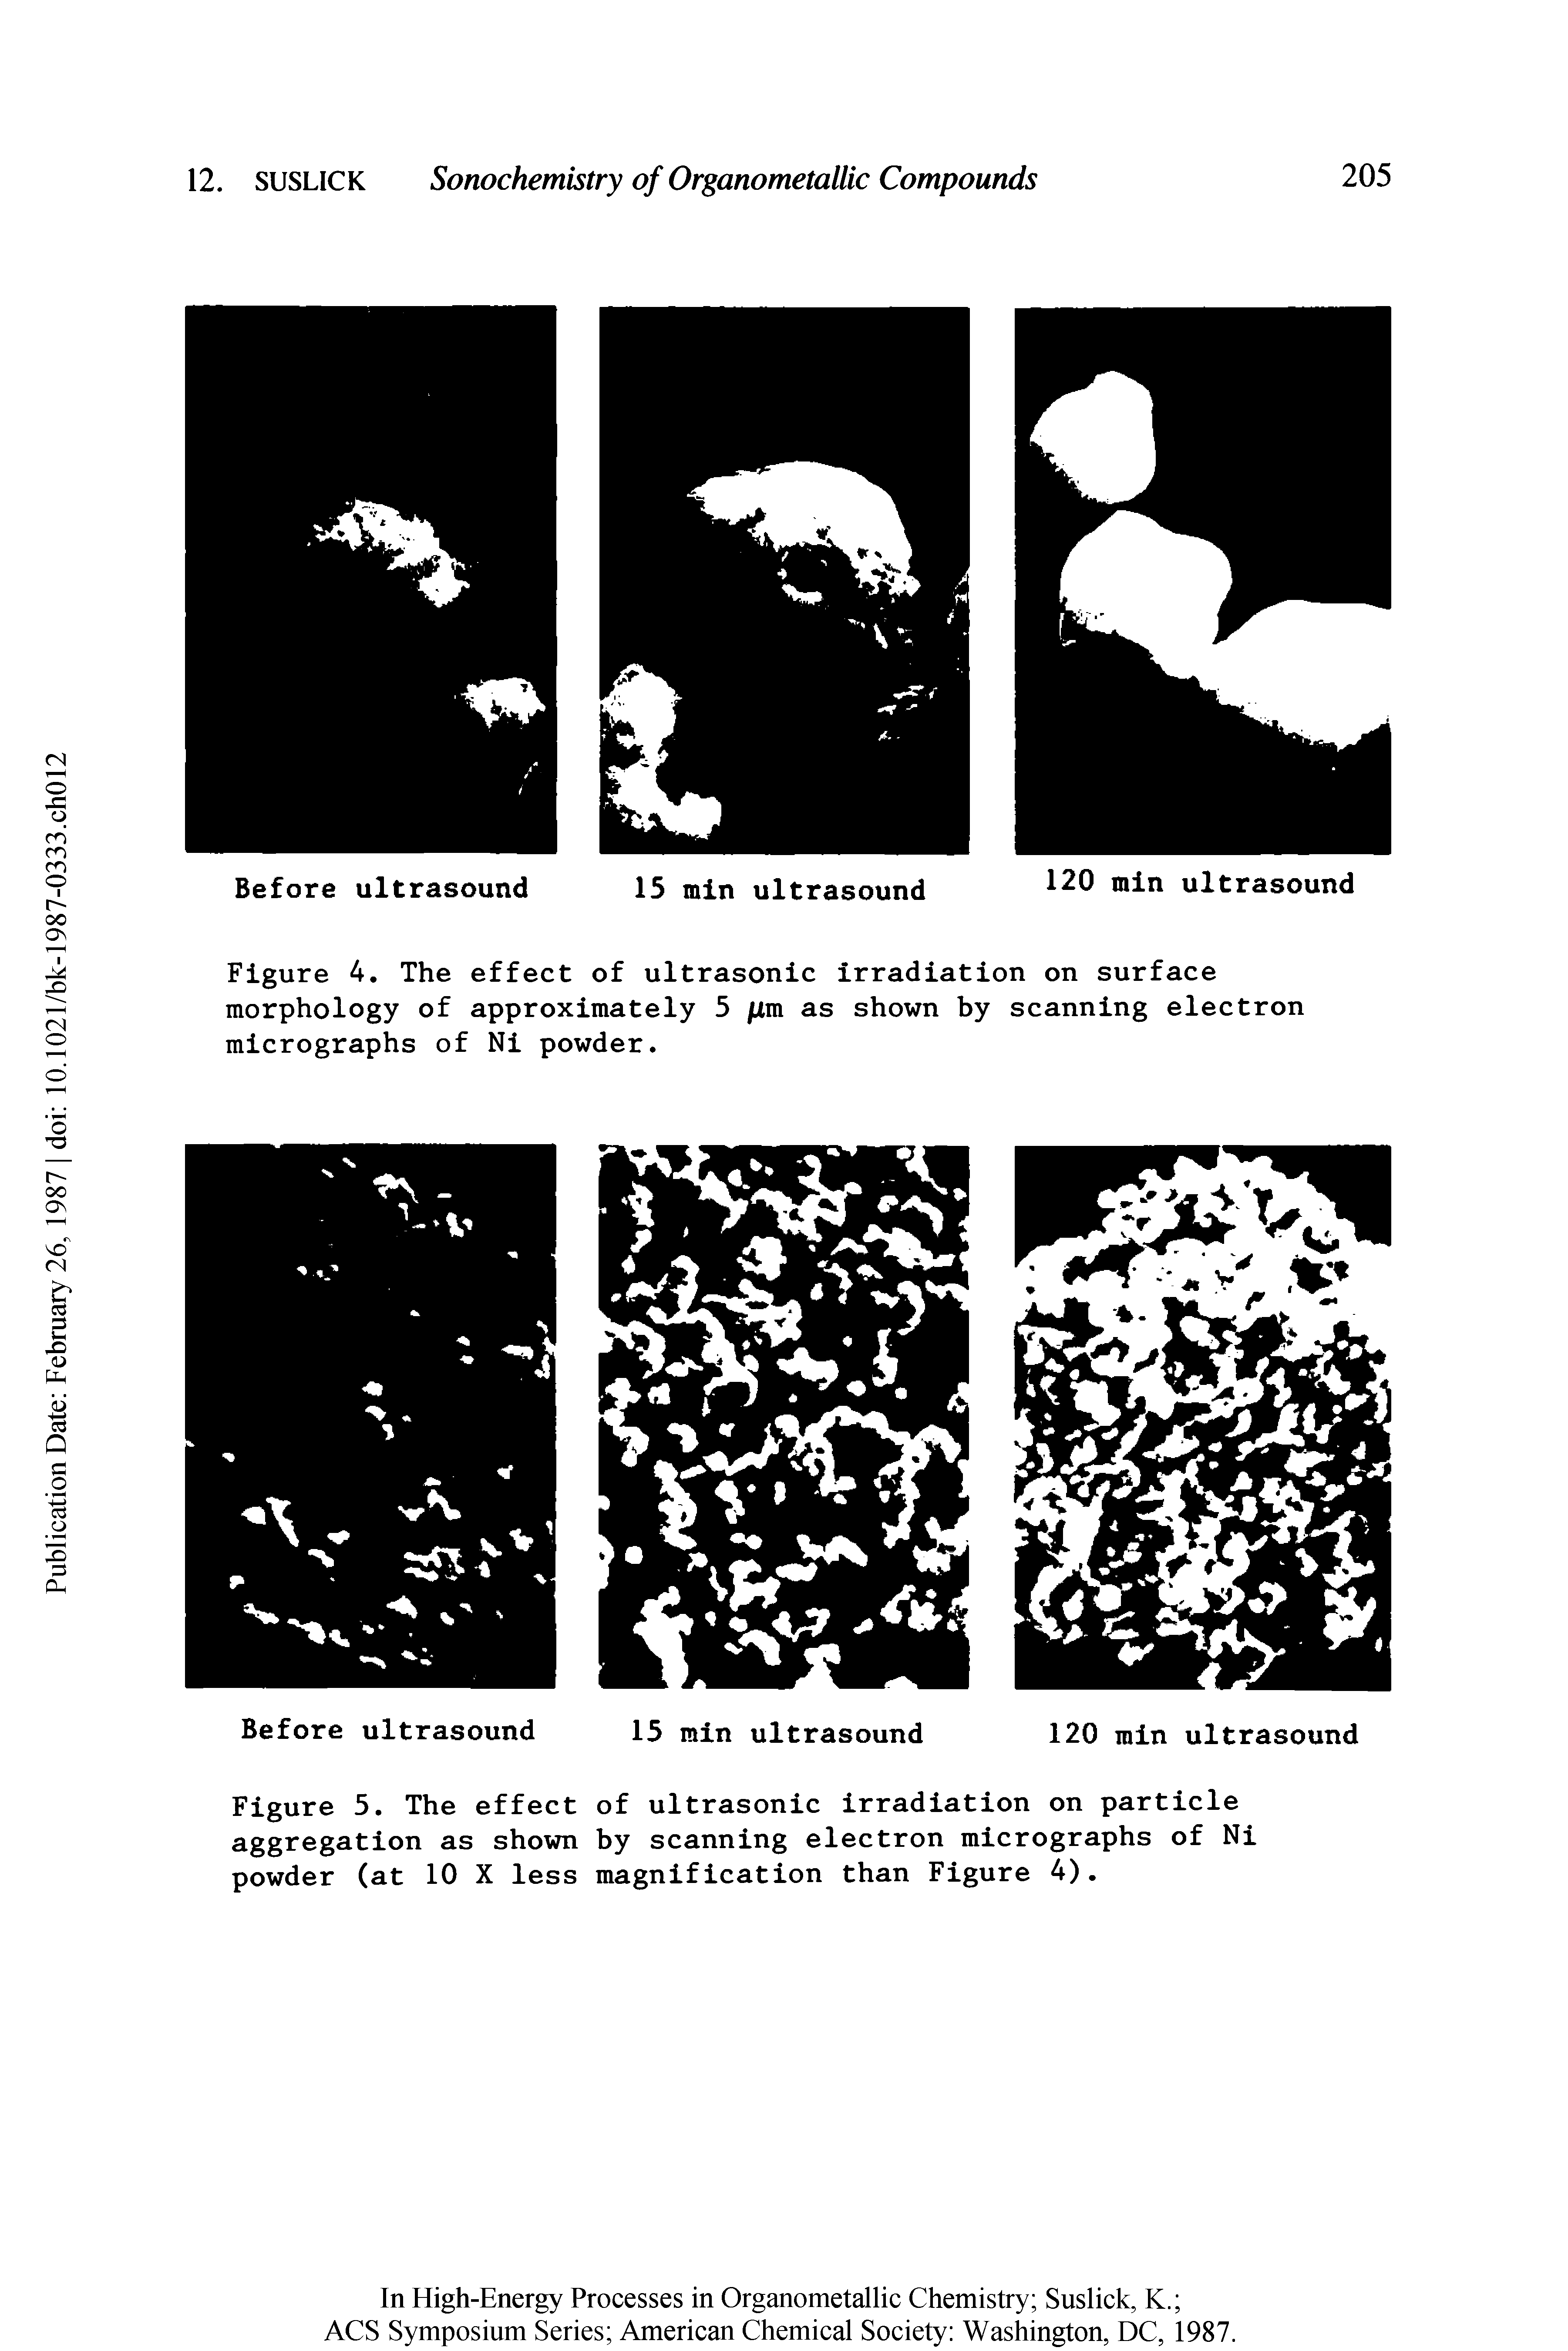 Figure 4. The effect of ultrasonic irradiation on surface morphology of approximately 5 /nm as shown by scanning electron micrographs of Ni powder.